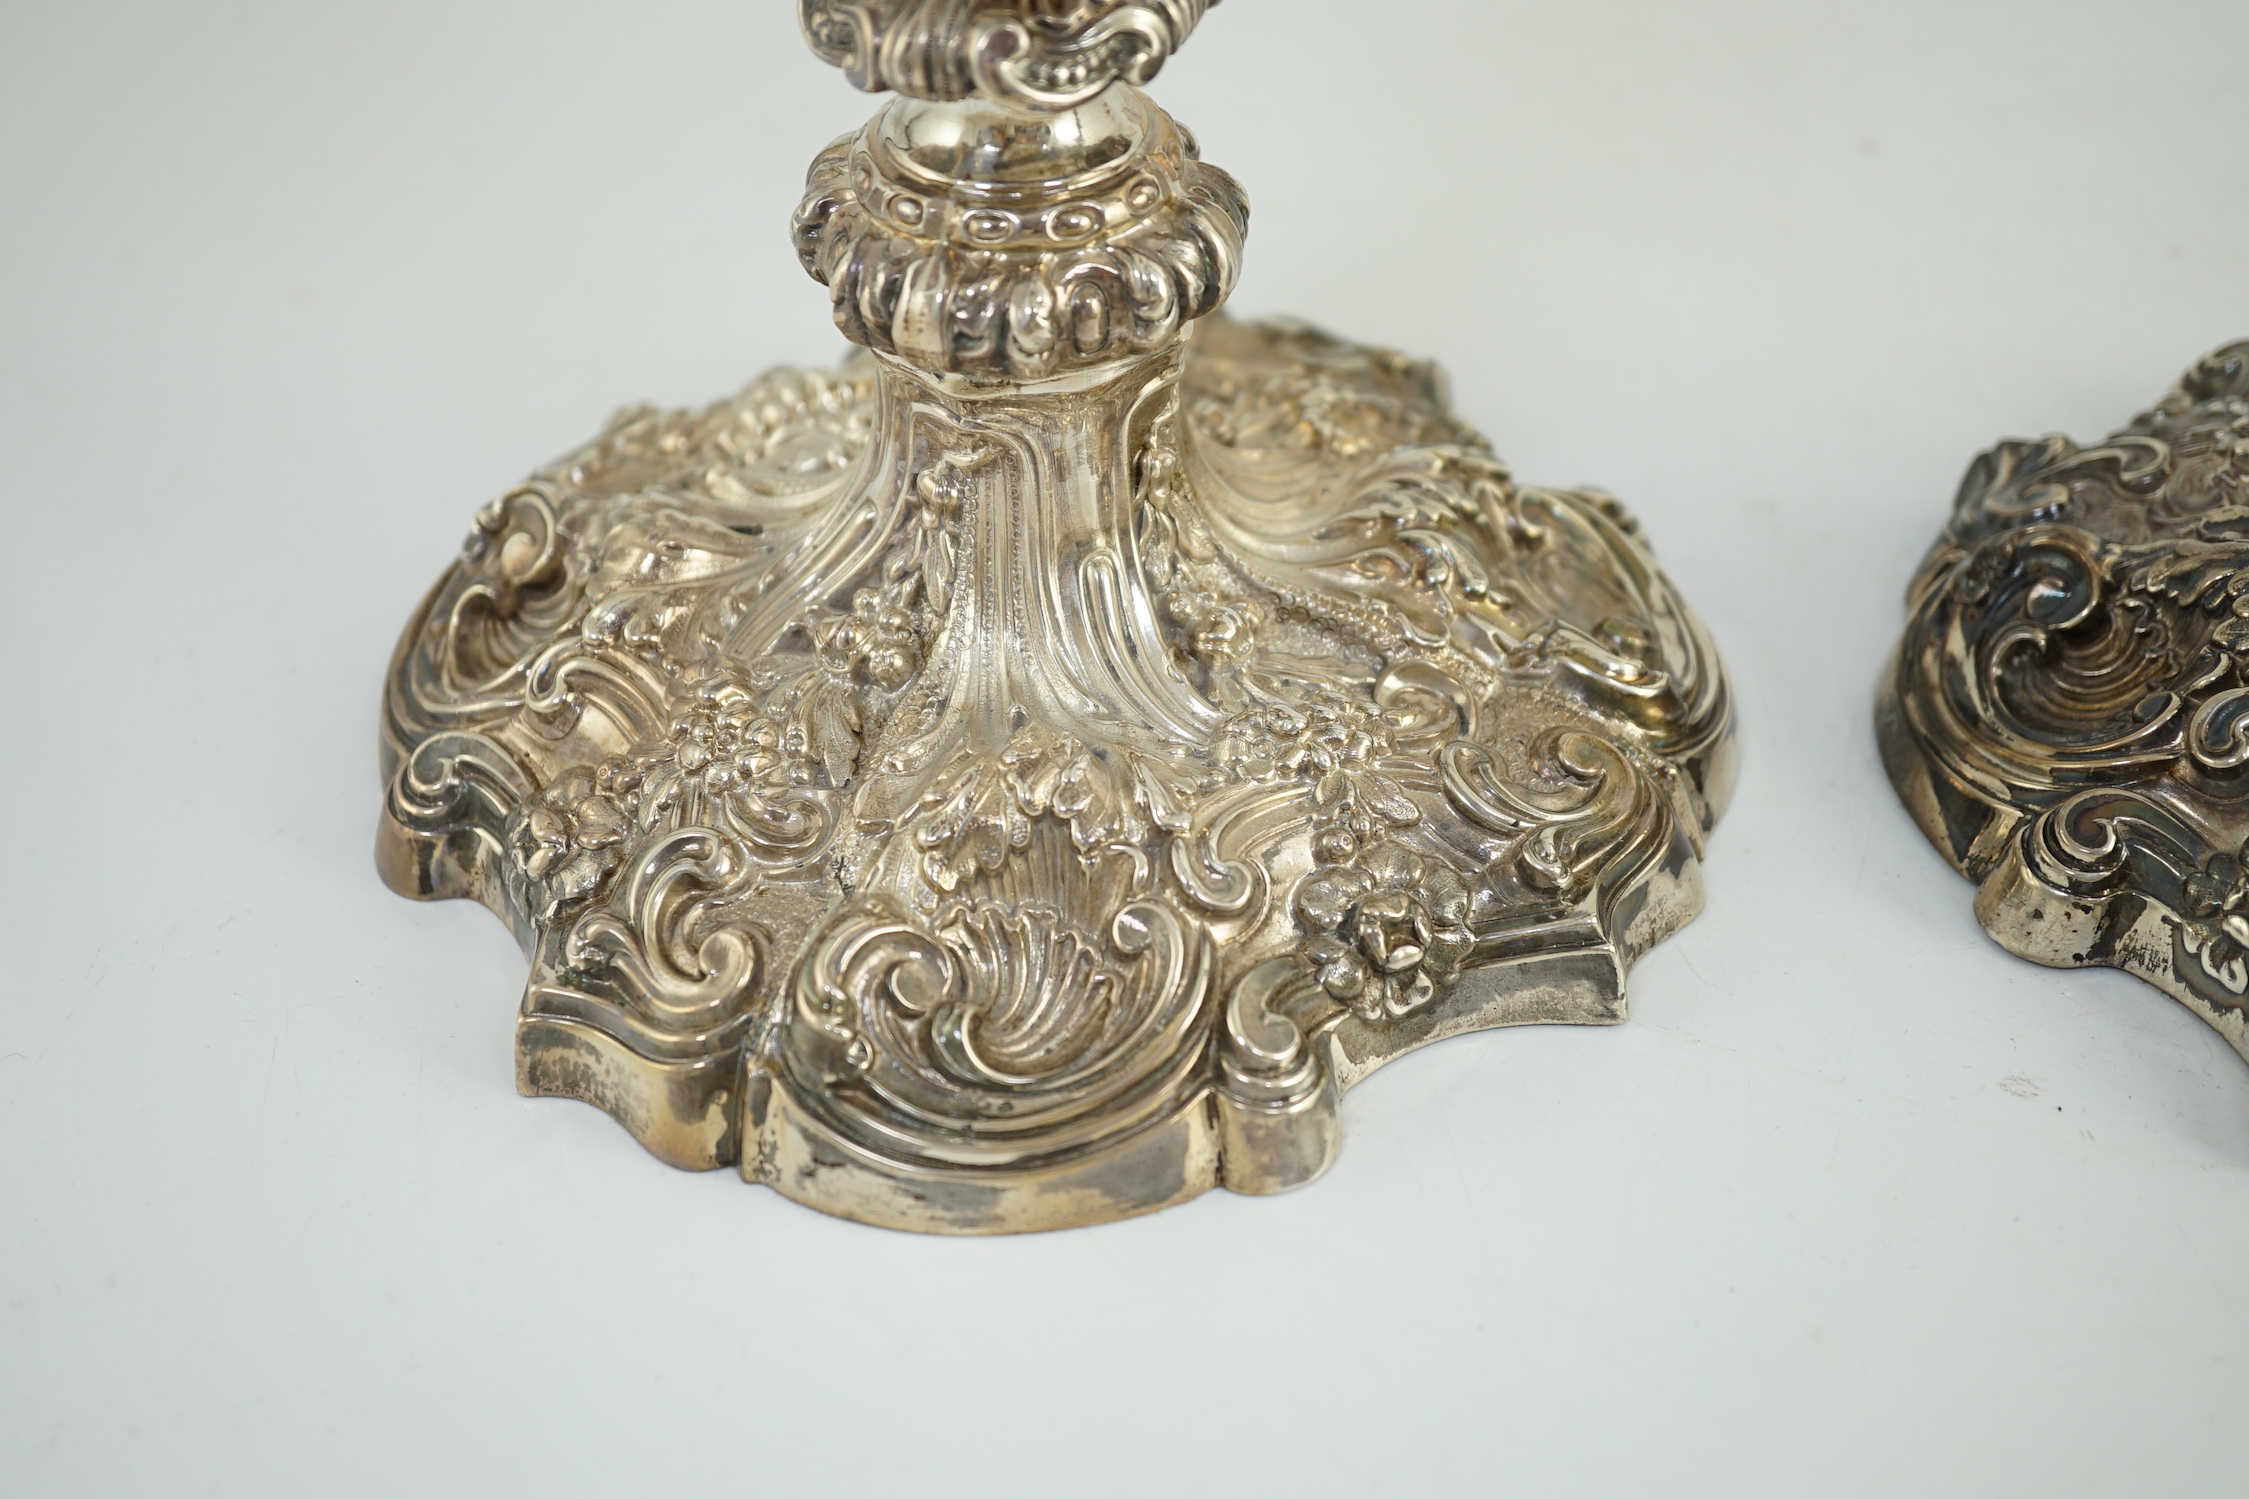 An ornate pair of Edwardian silver candlesticks, by Walker & Hall, with fixed sconces, waisted - Image 9 of 11